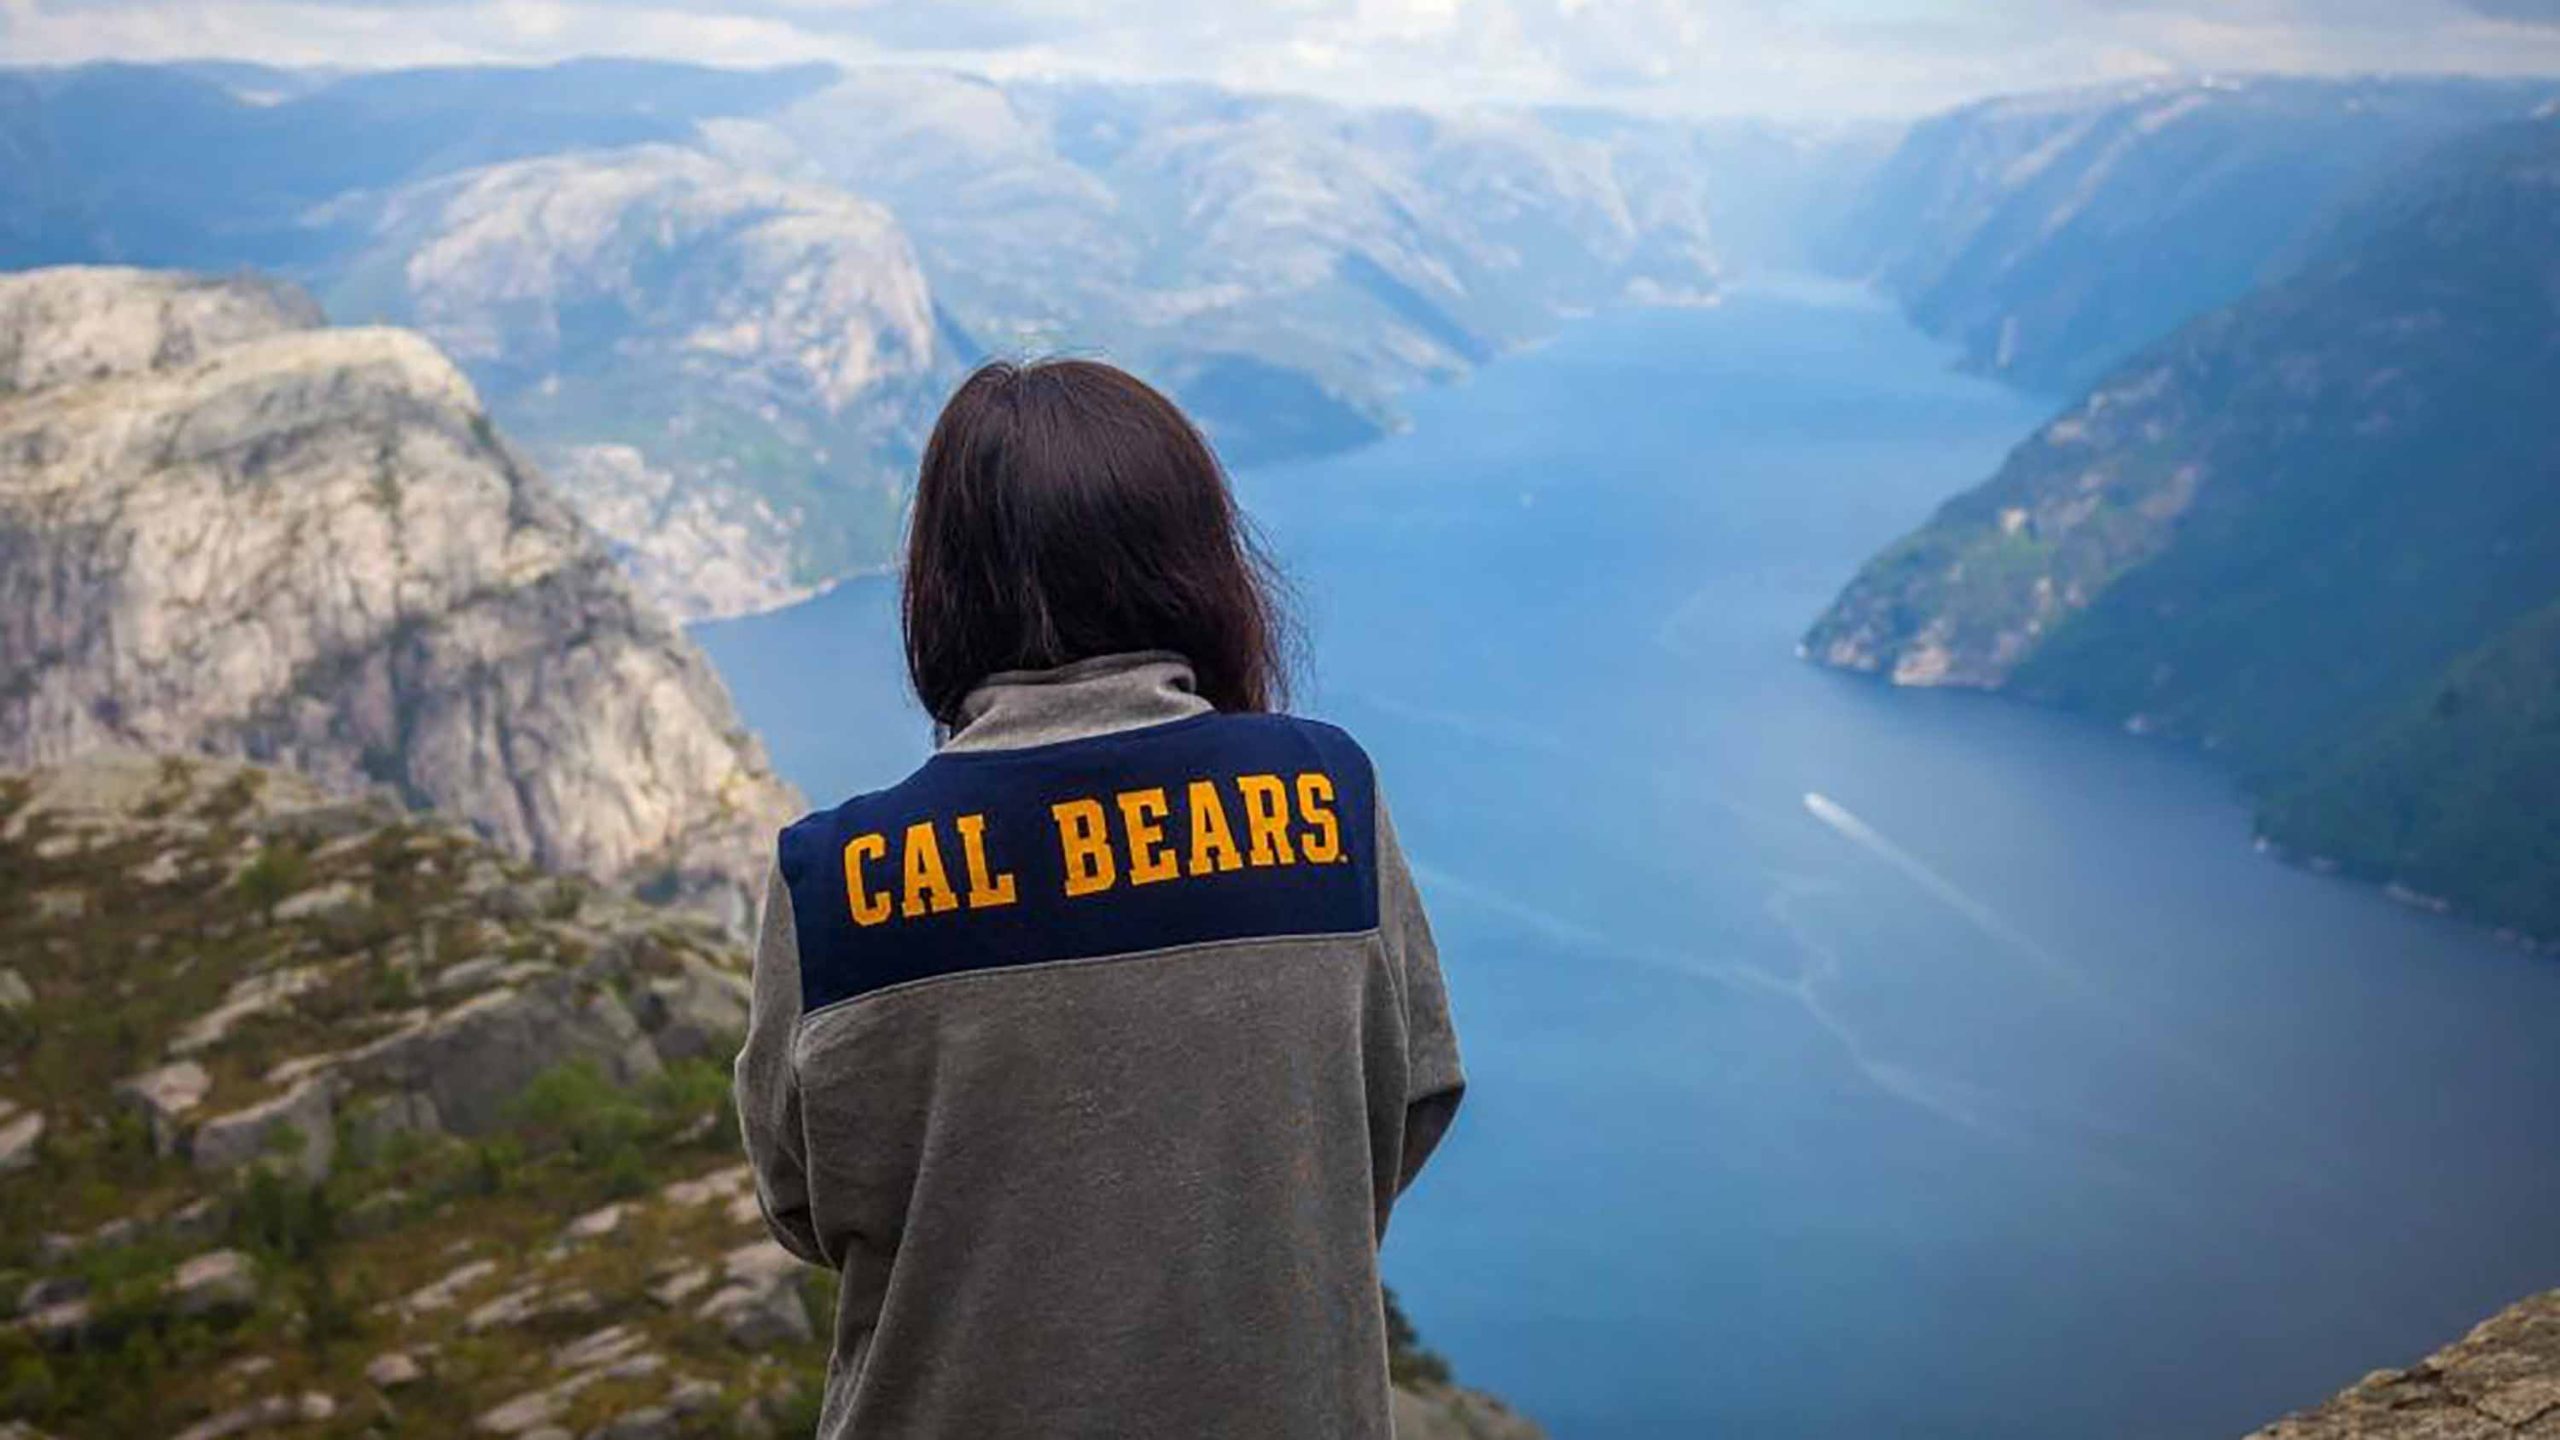 Cal Bears student overlooking the Lysefjord in Norway